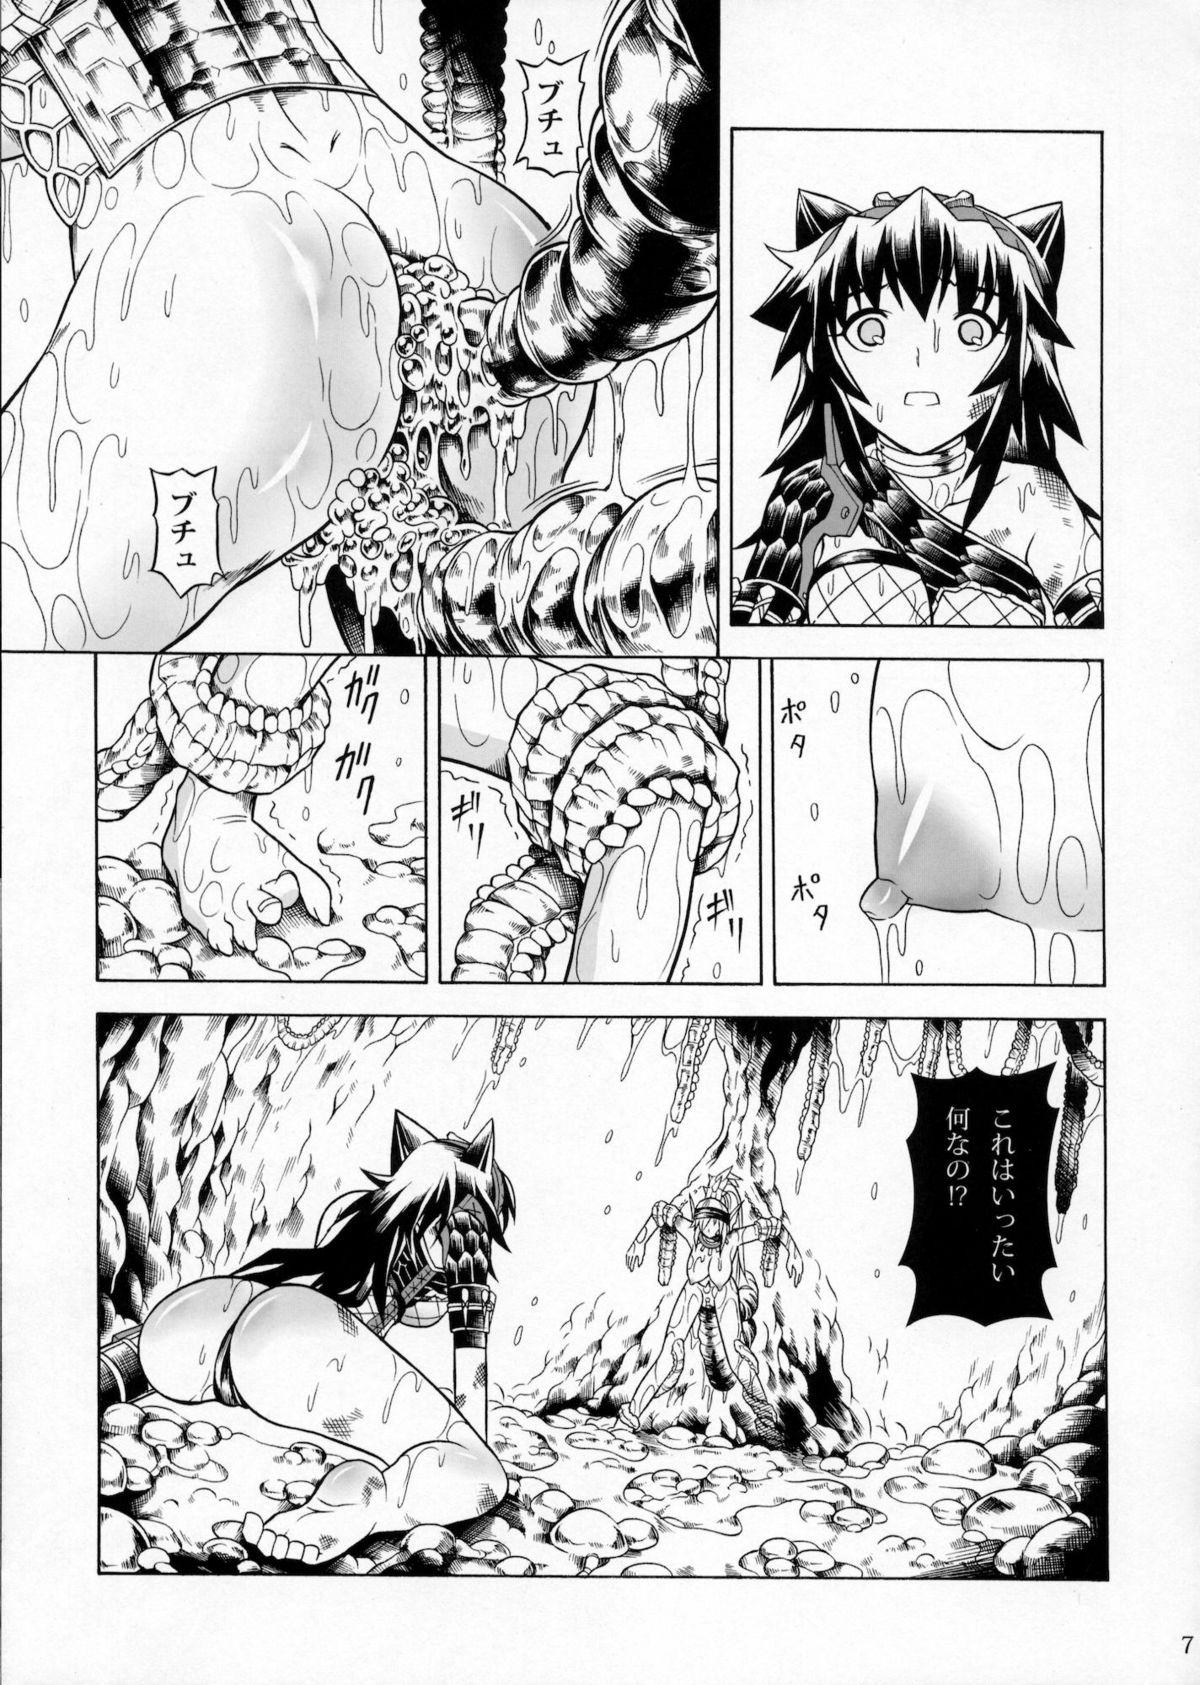 Spit Solo Hunter no Seitai 2 The second part - Monster hunter Shemale Porn - Page 6